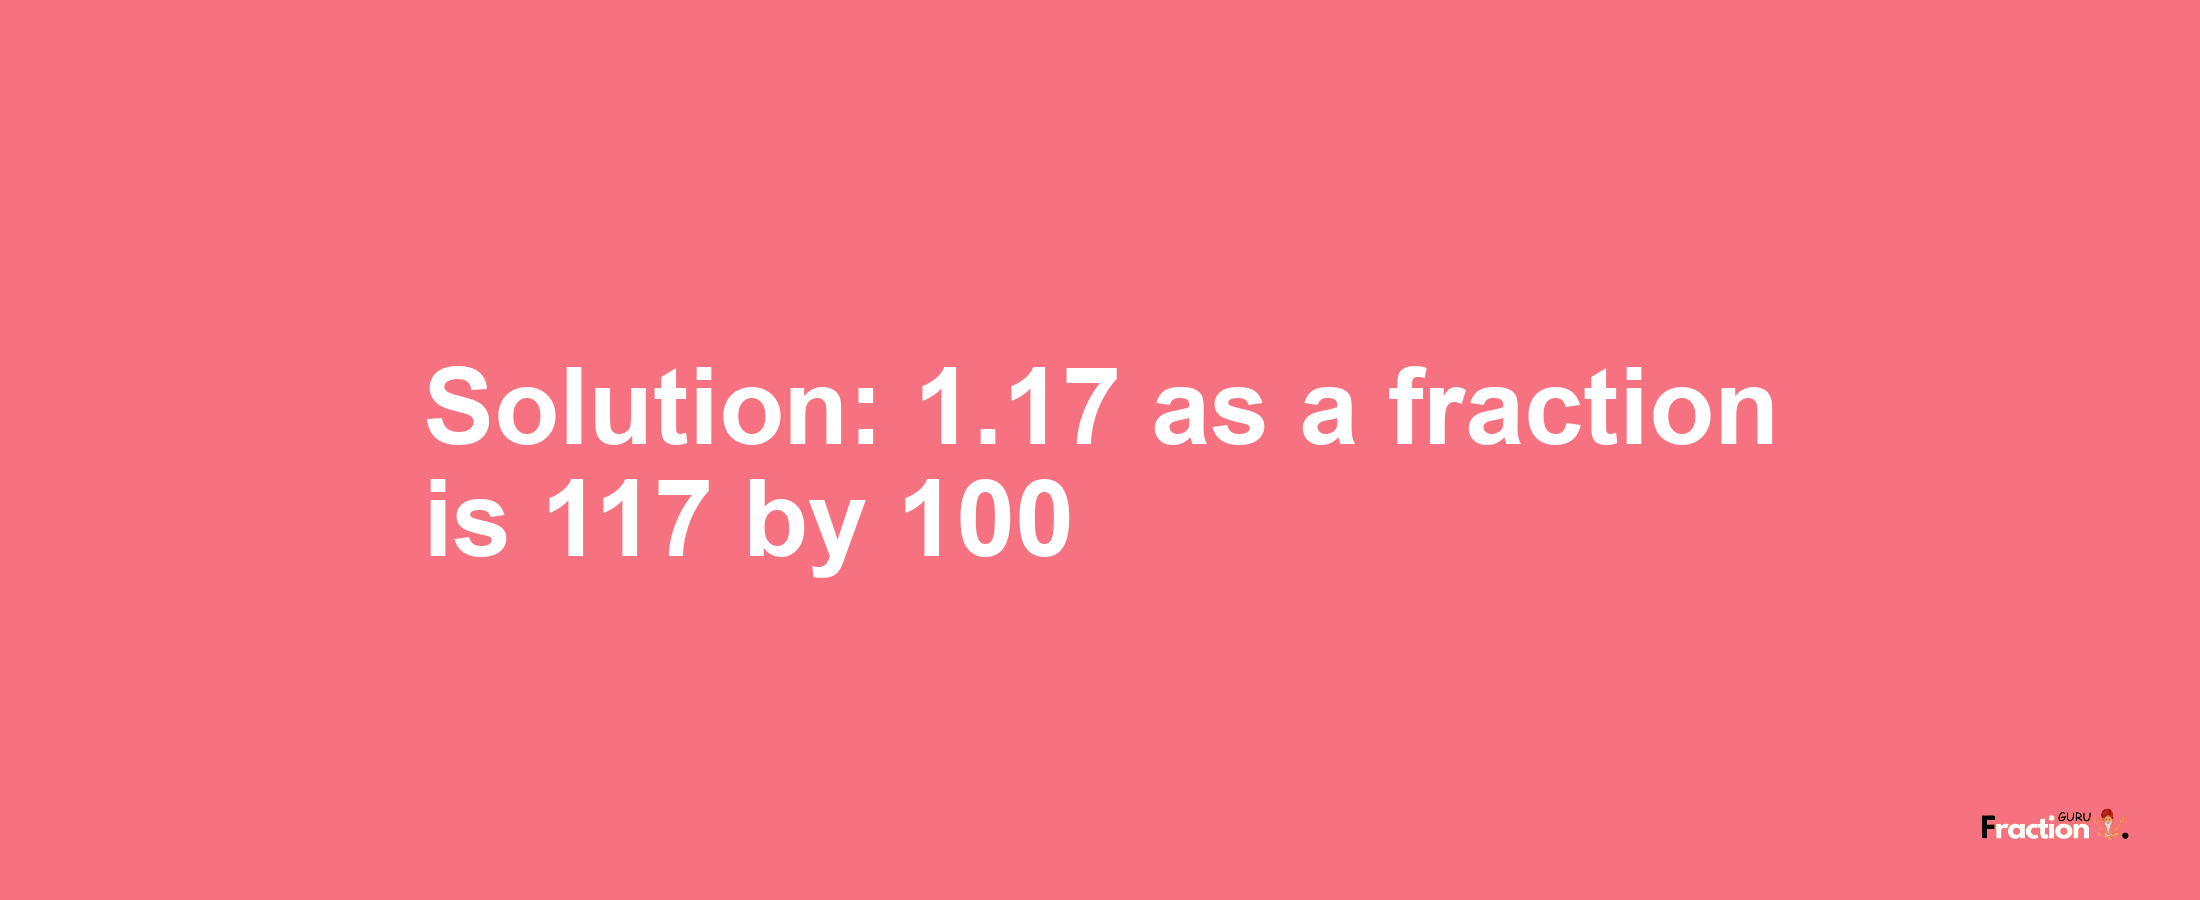 Solution:1.17 as a fraction is 117/100